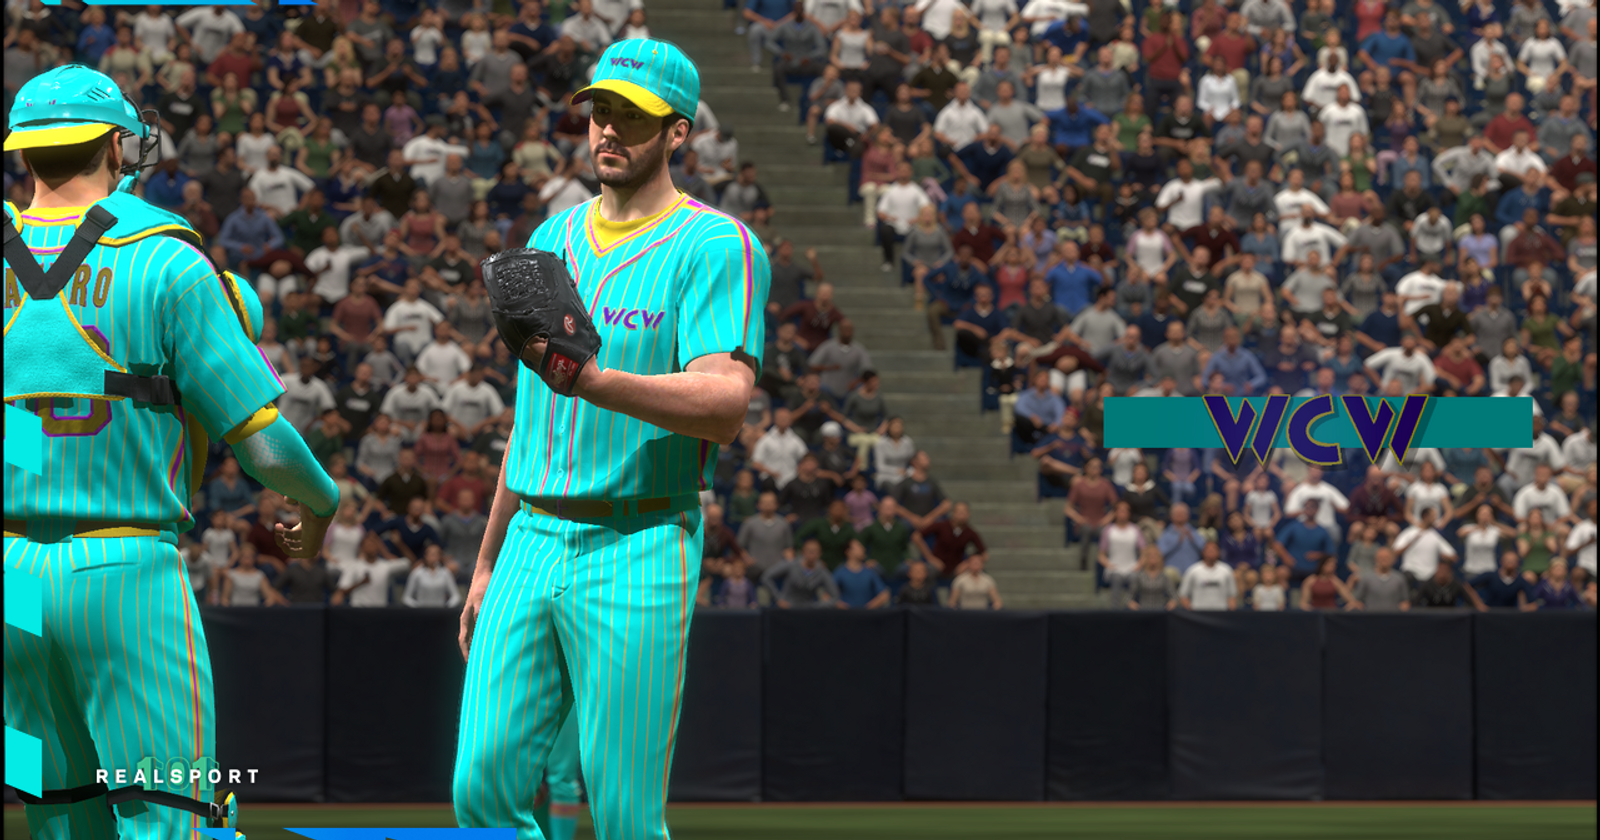 MLB The Show 21: How to Use Created Team in Franchise